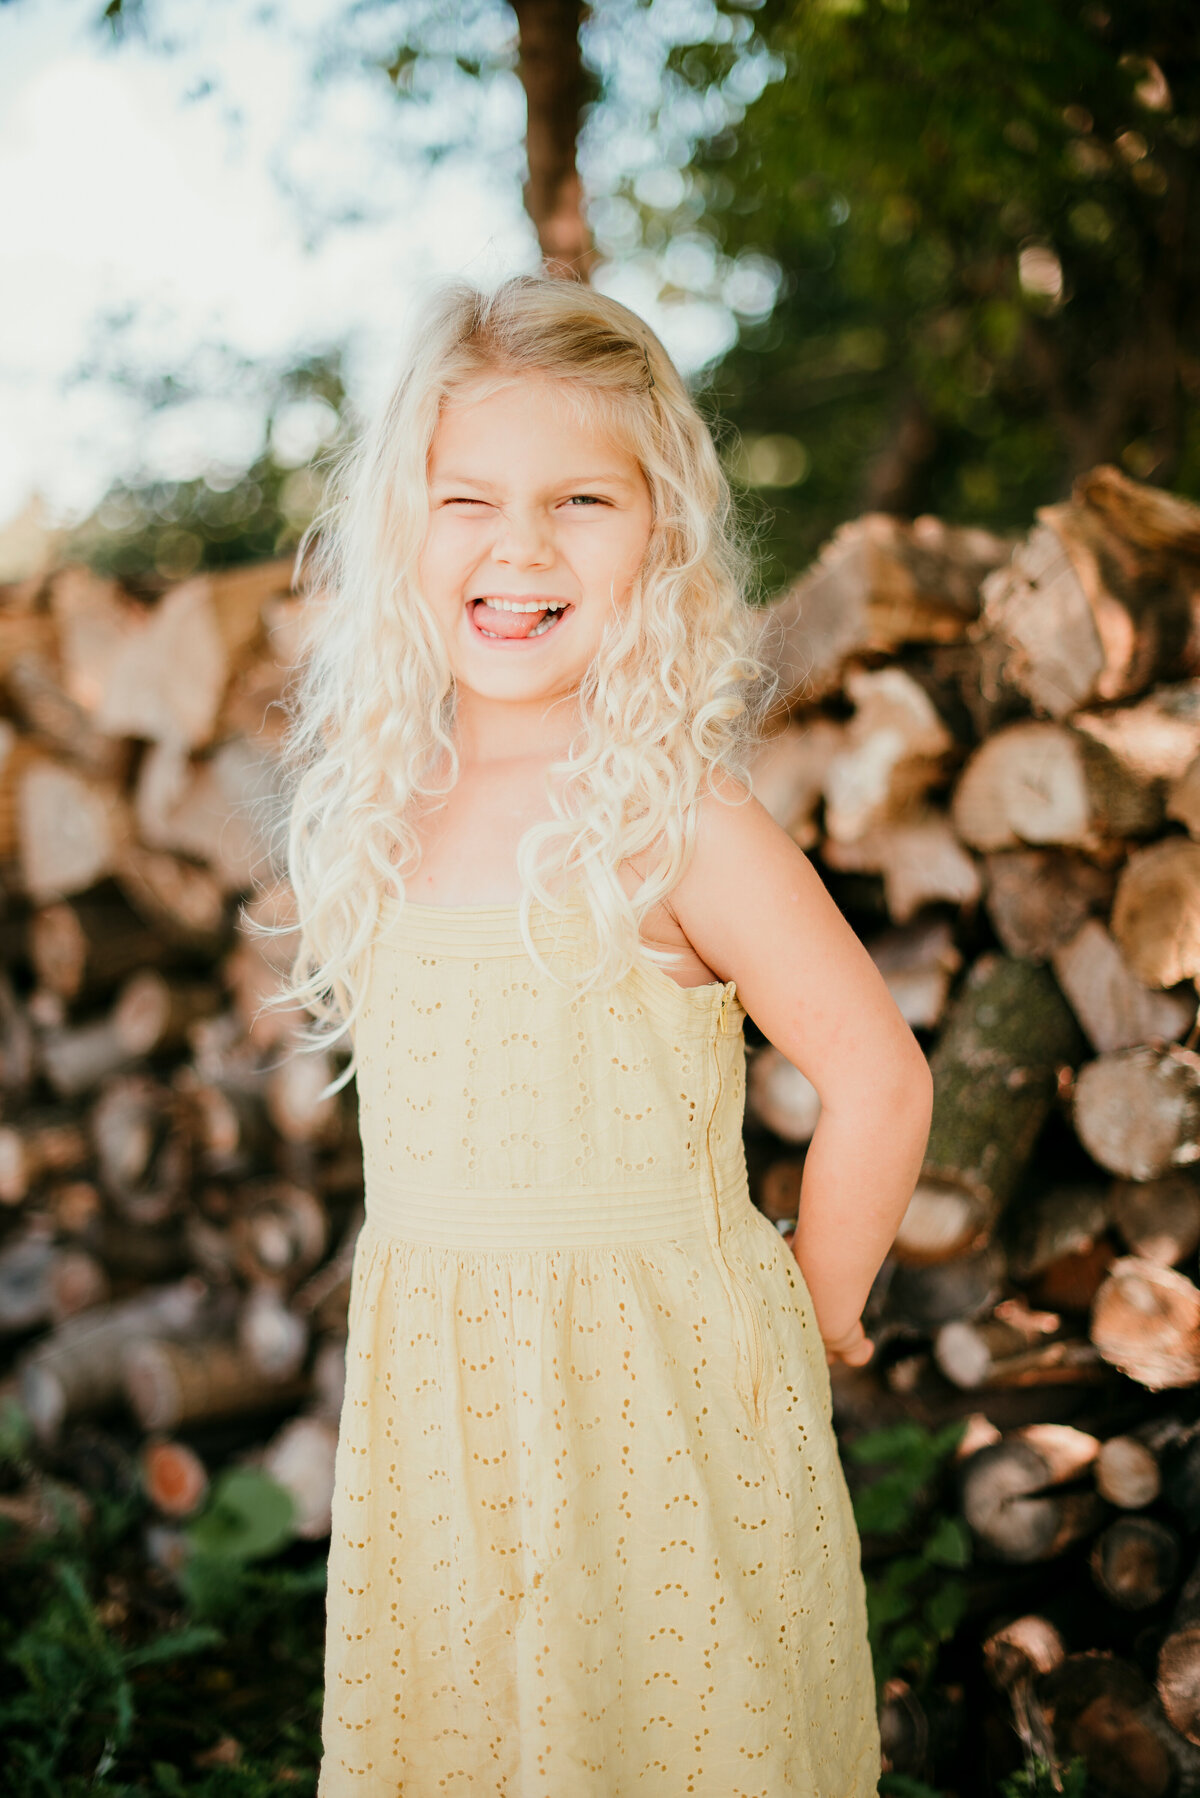 Capture the joy in every homeschool moment with our boutique photography. Explore the genuine expressions that make homeschool memories truly special.